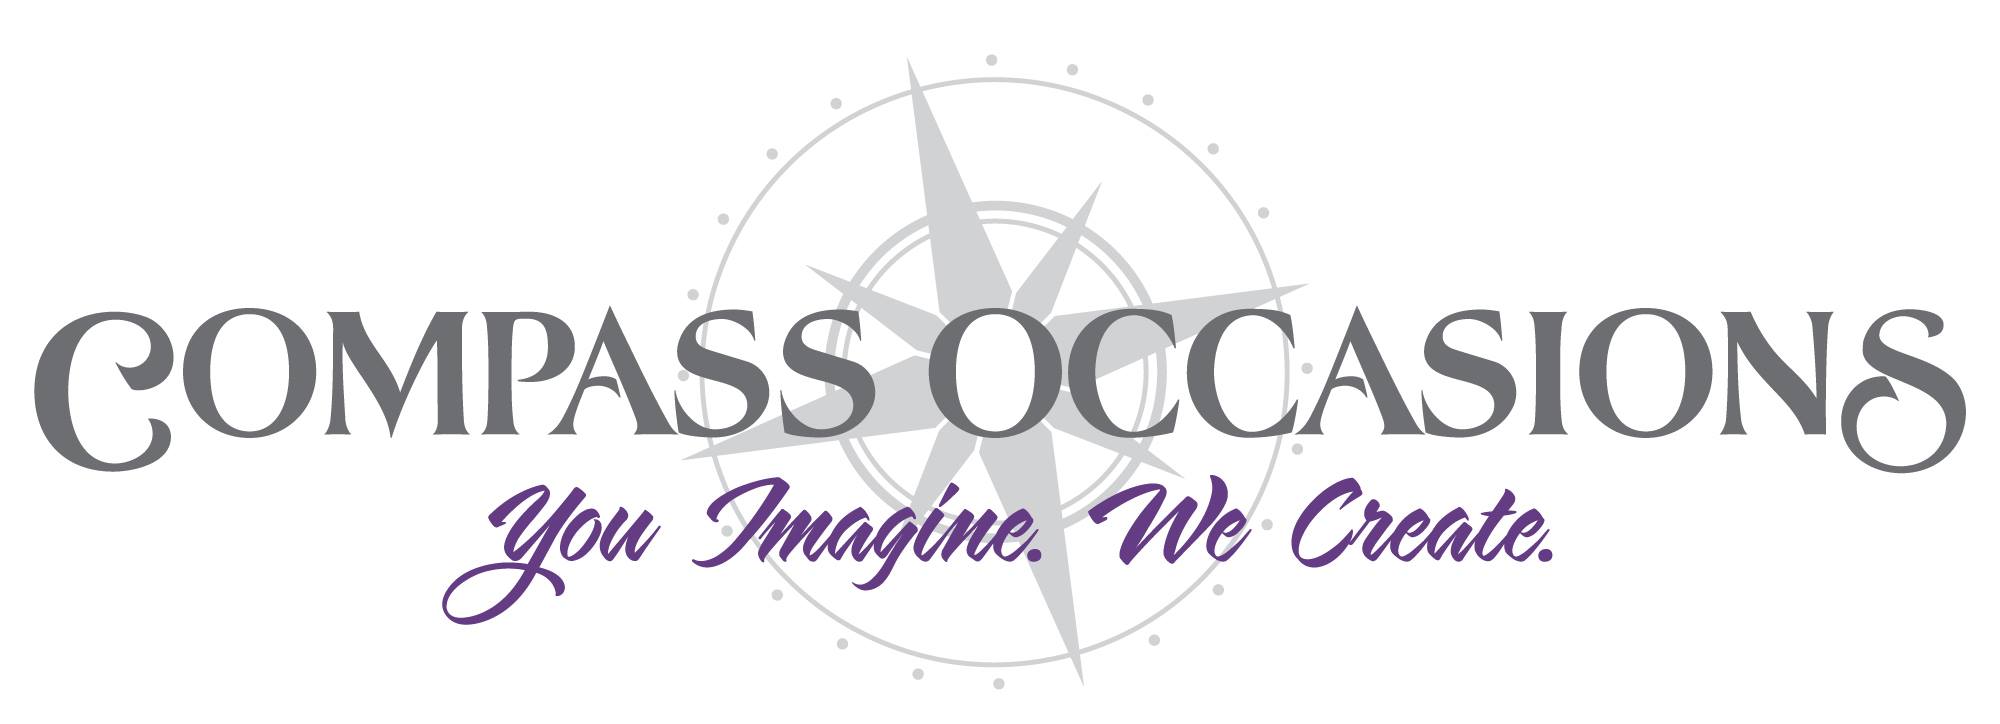 Compass Occasions logo